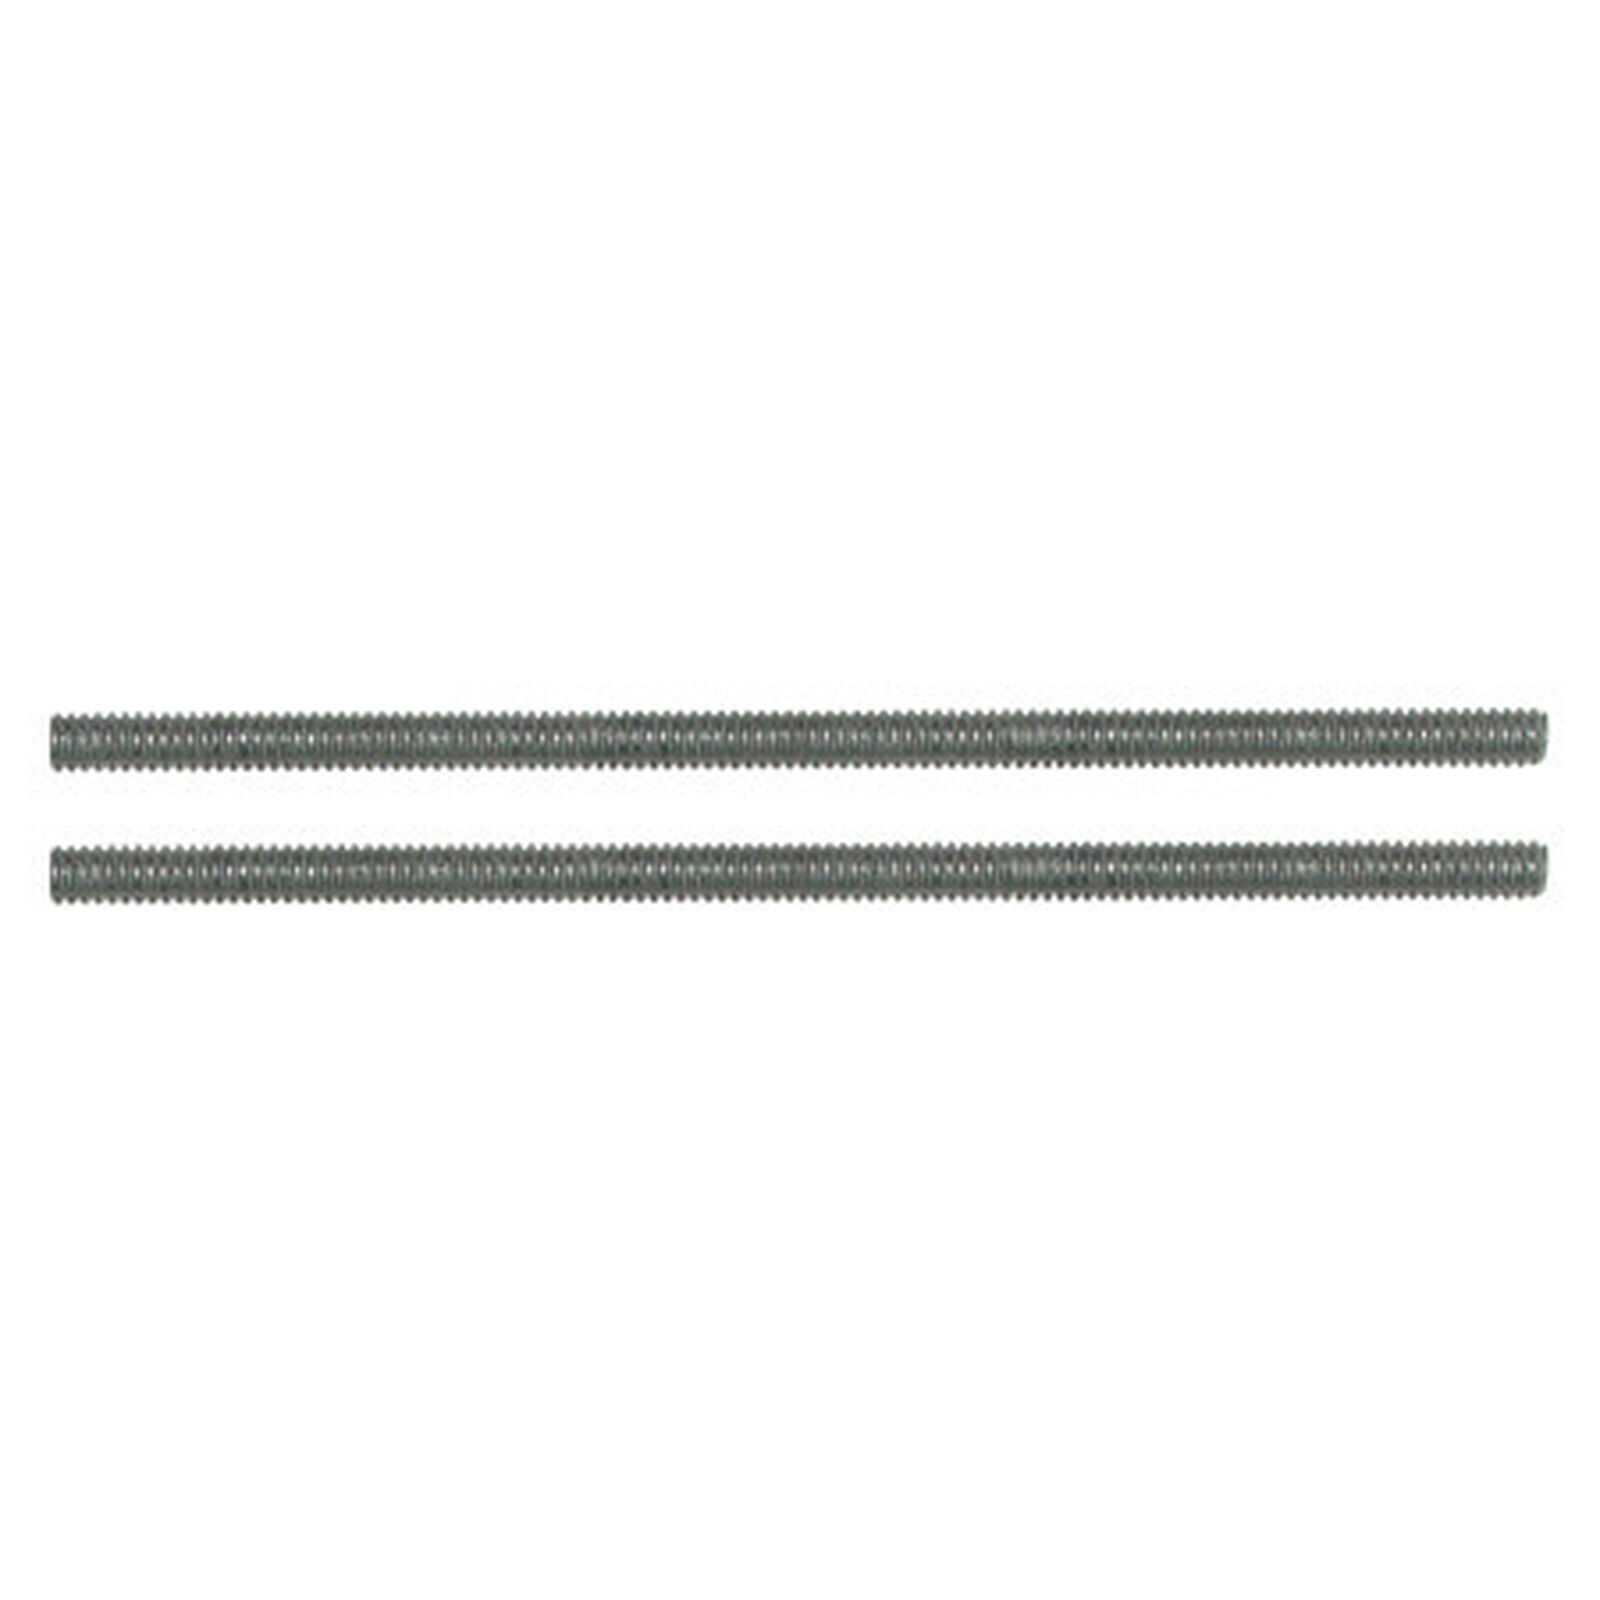 4-40 All Threaded Rods,12"(2)